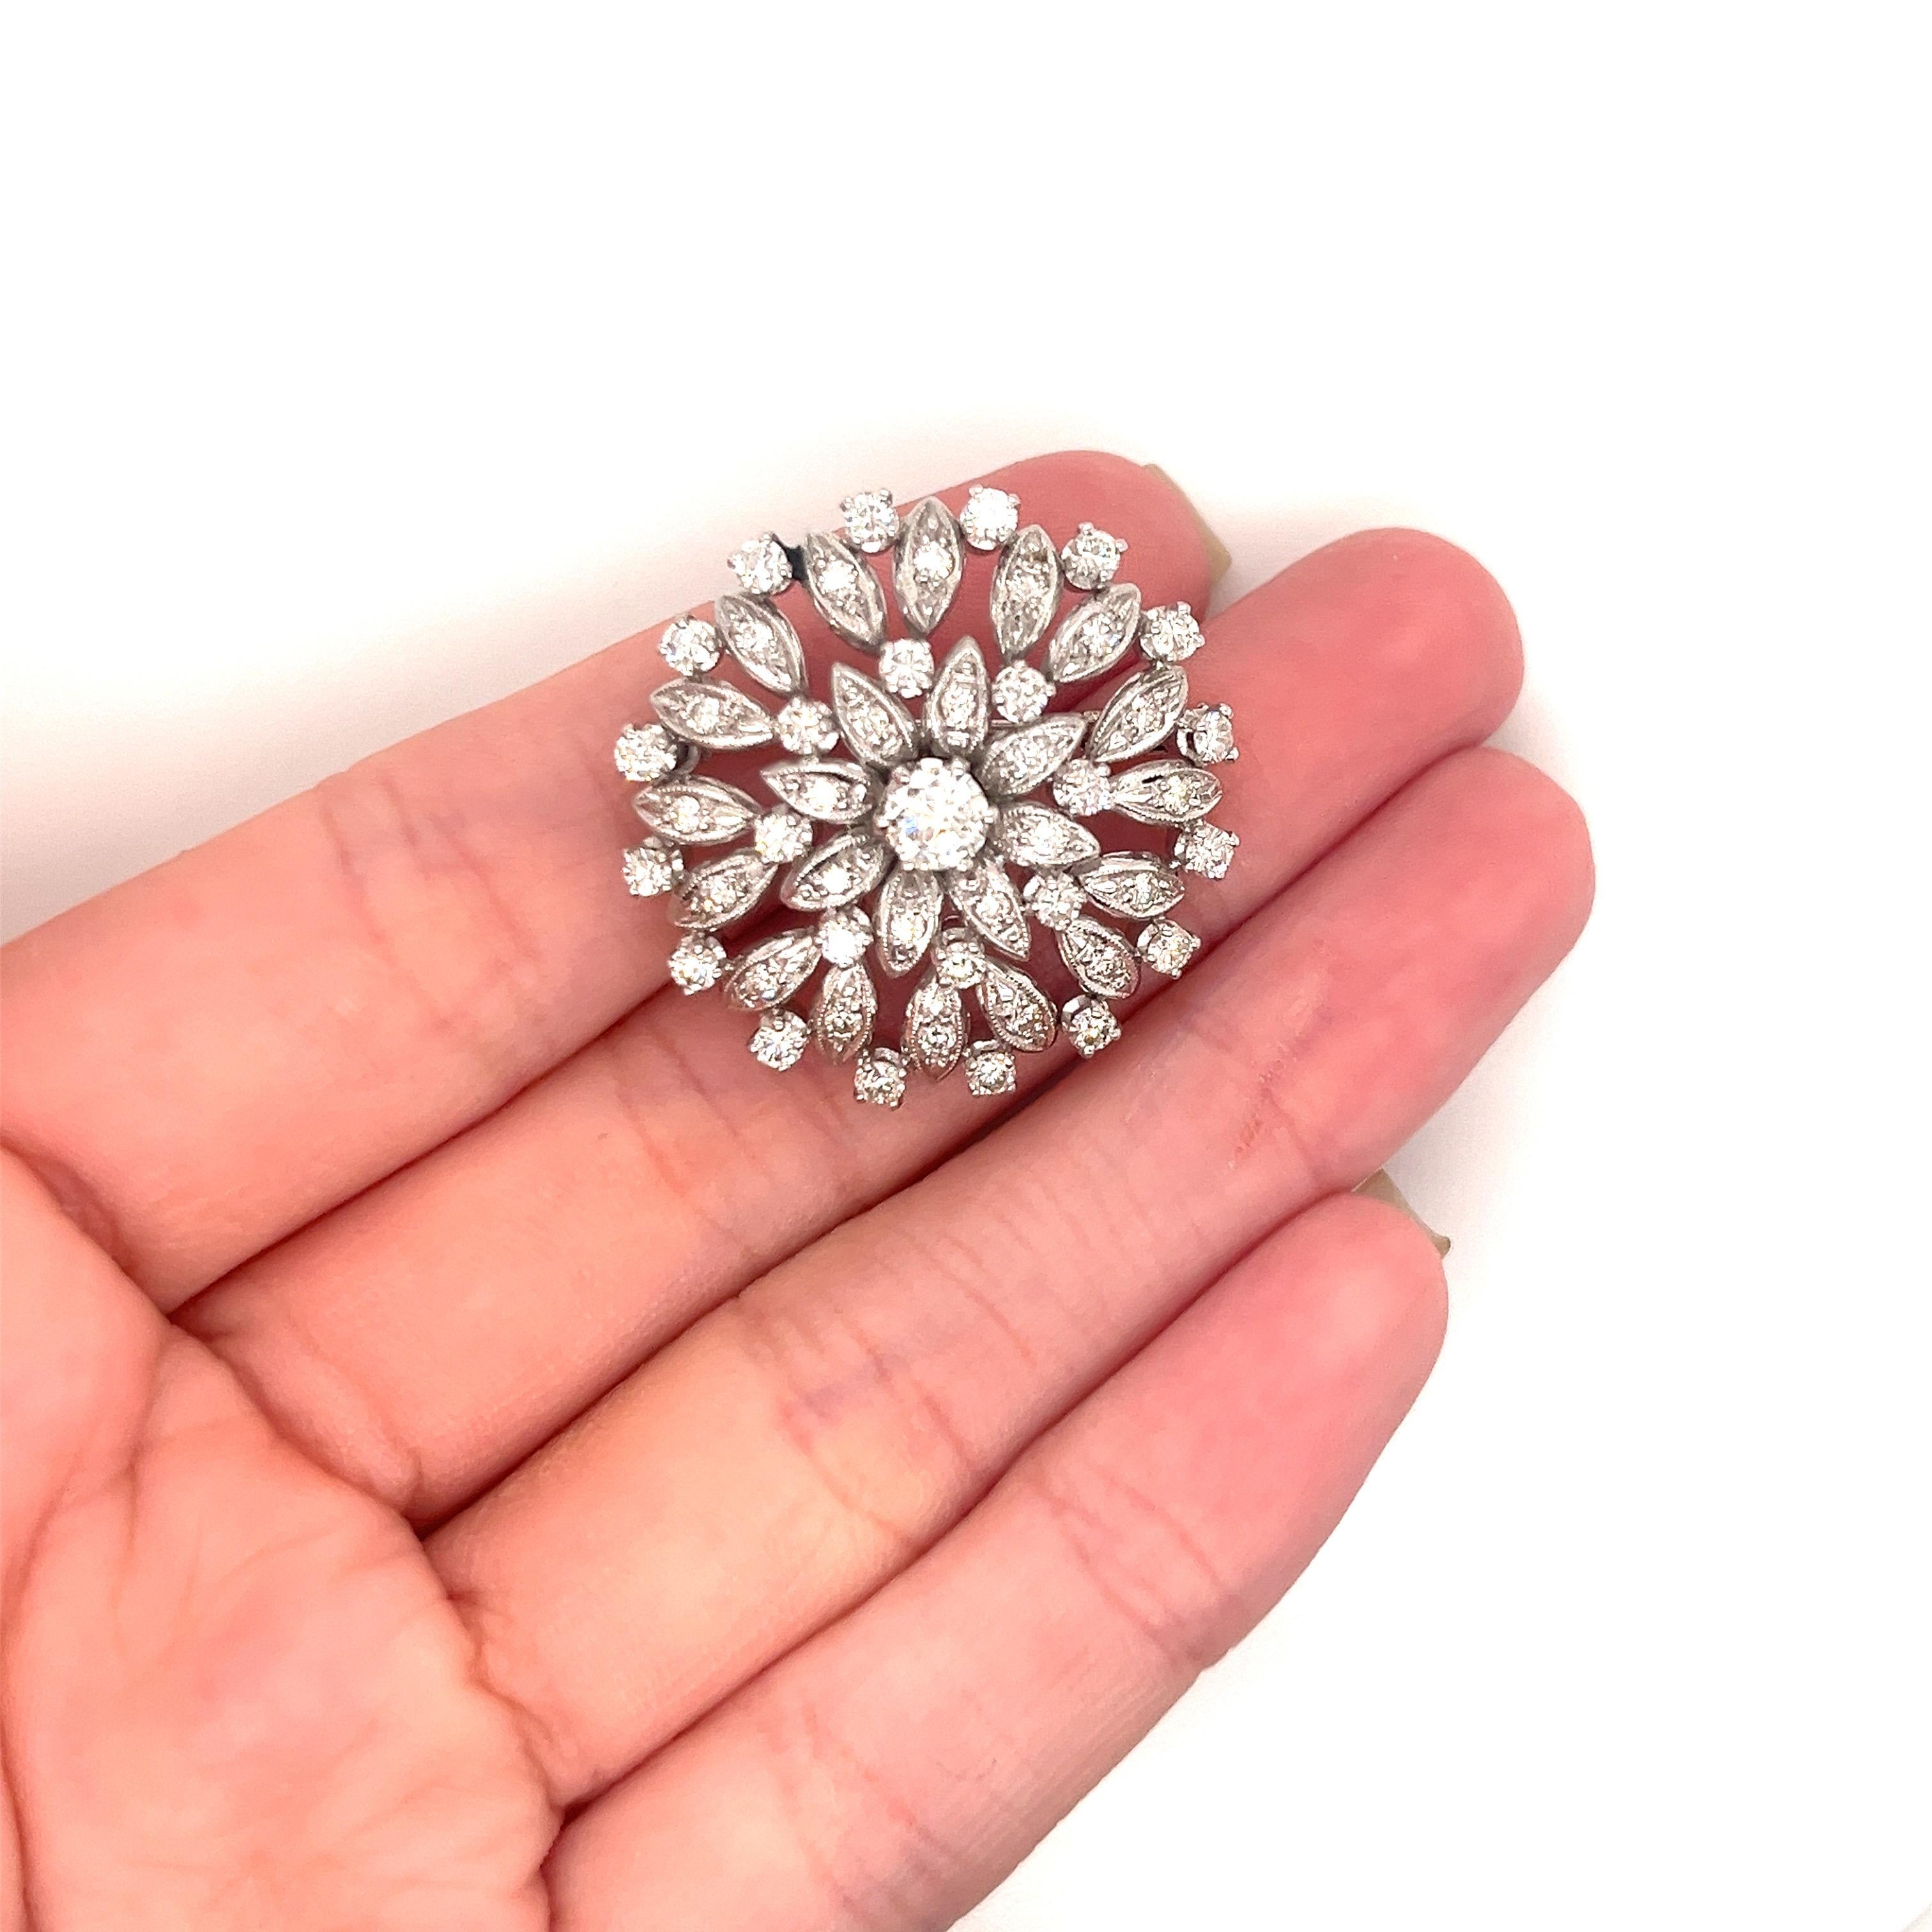 Vintage 18k White Gold Diamond Flower Brooch In Excellent Condition For Sale In Boston, MA